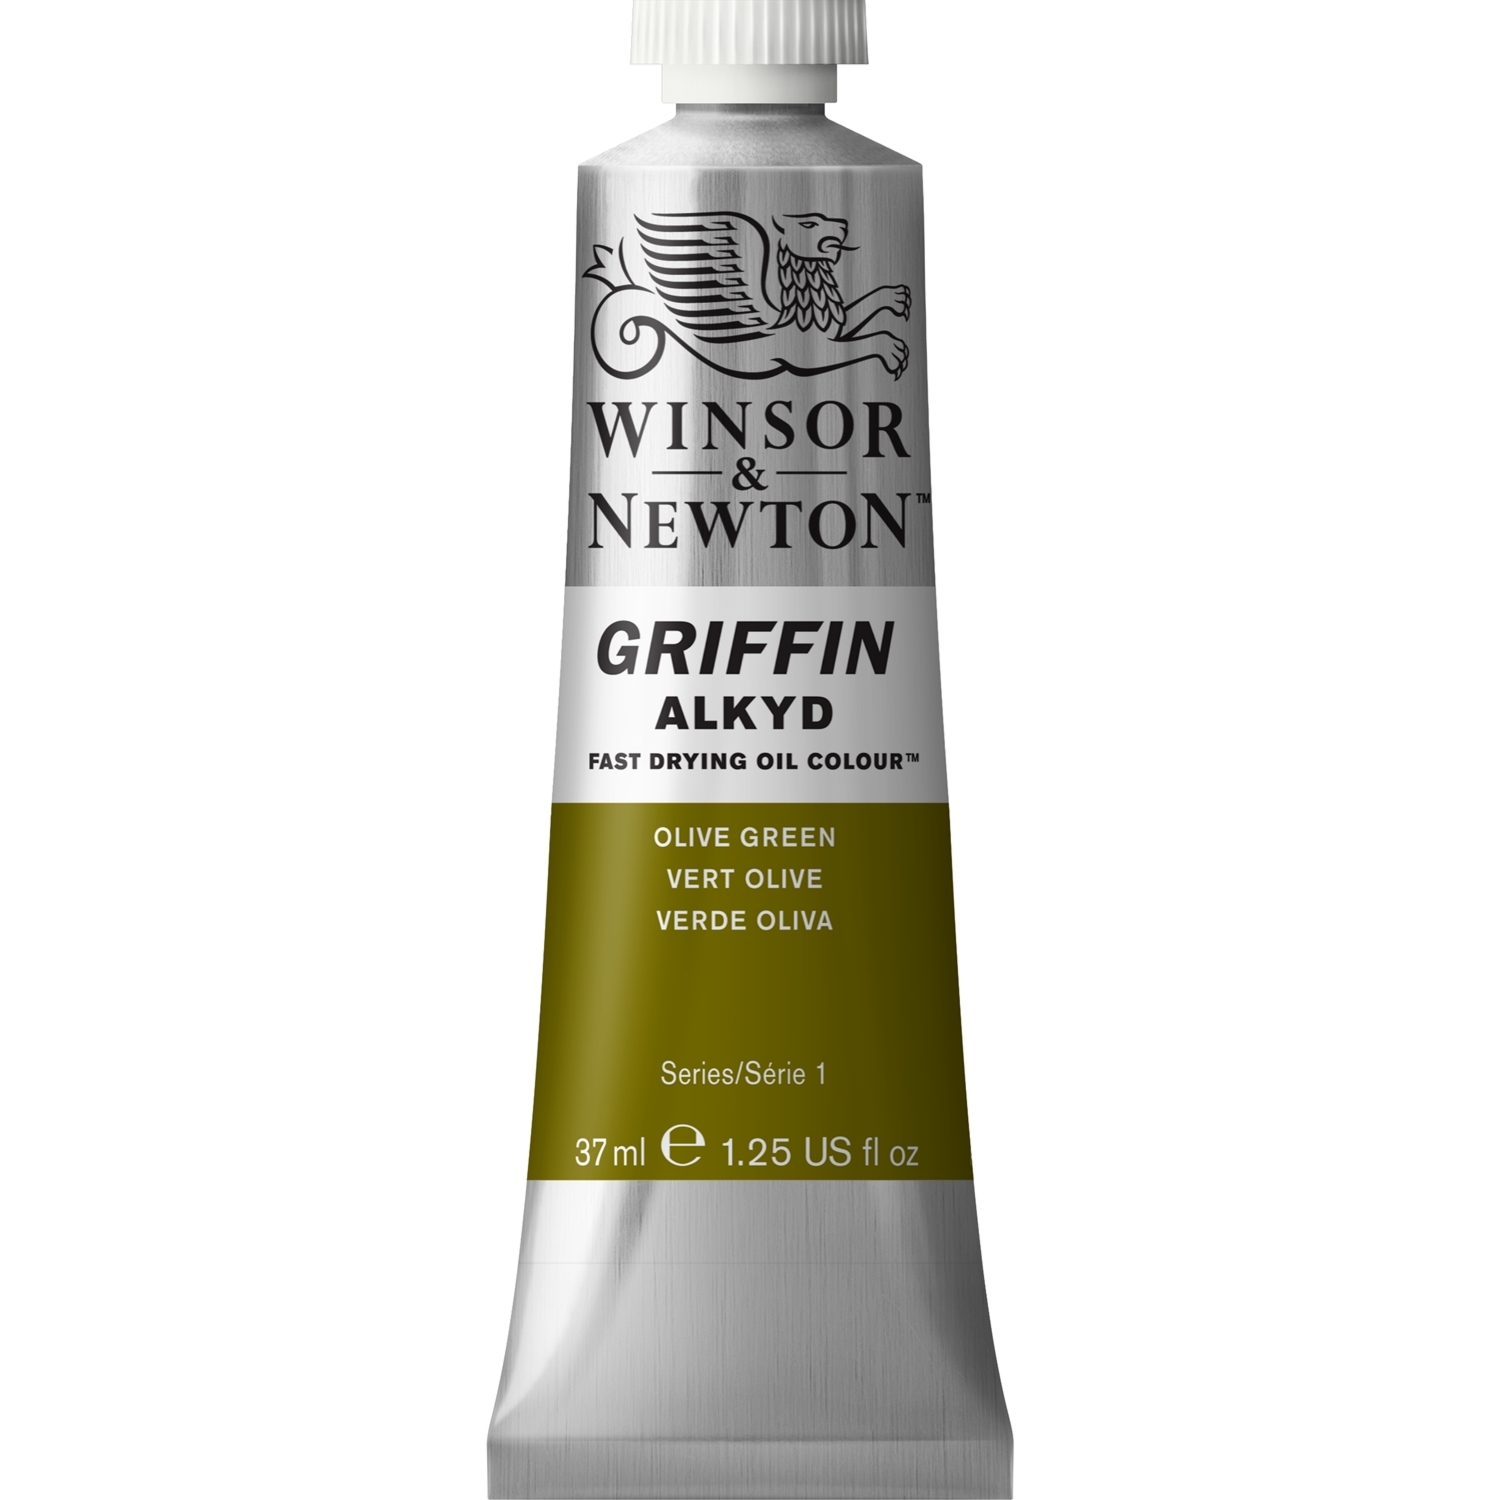 Winsor and Newton Griffin Alkyd Oil Colour - Olive Green Image 1